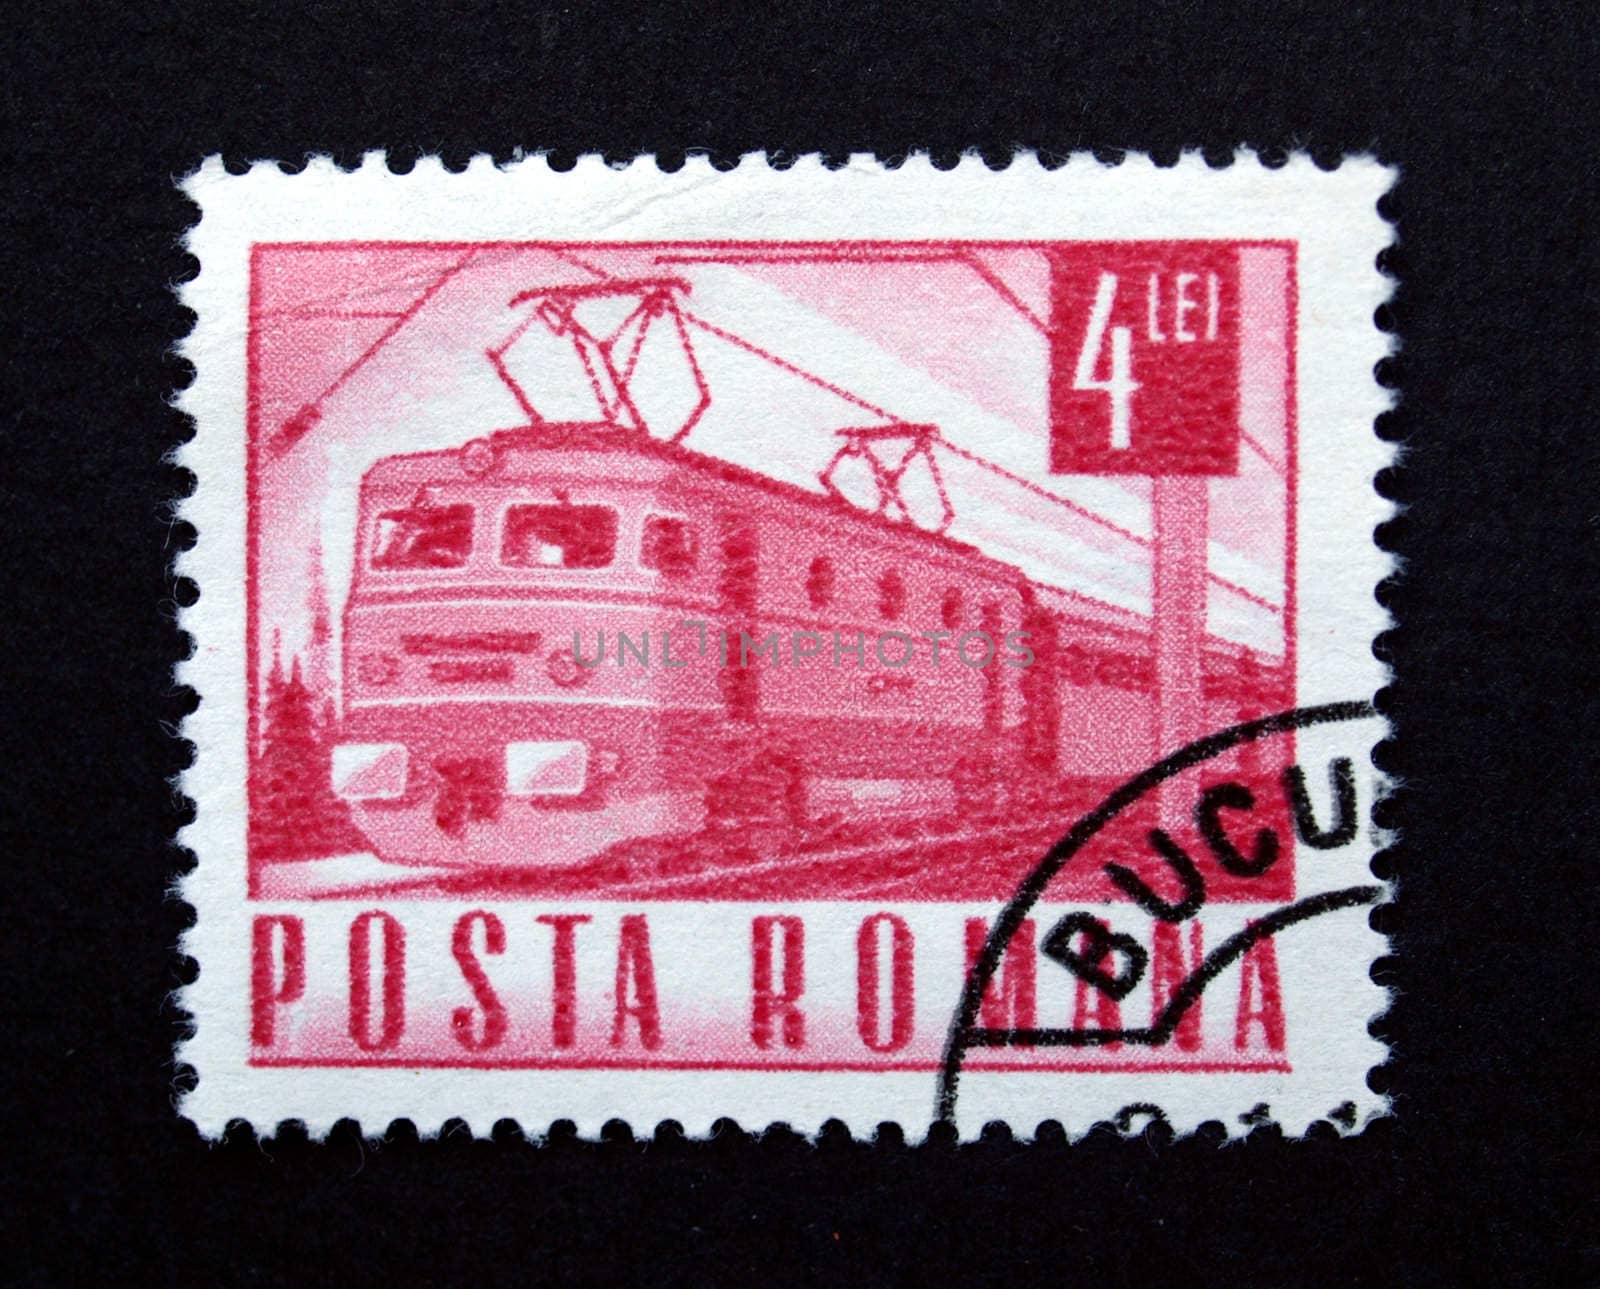 Romania stamp with train on black